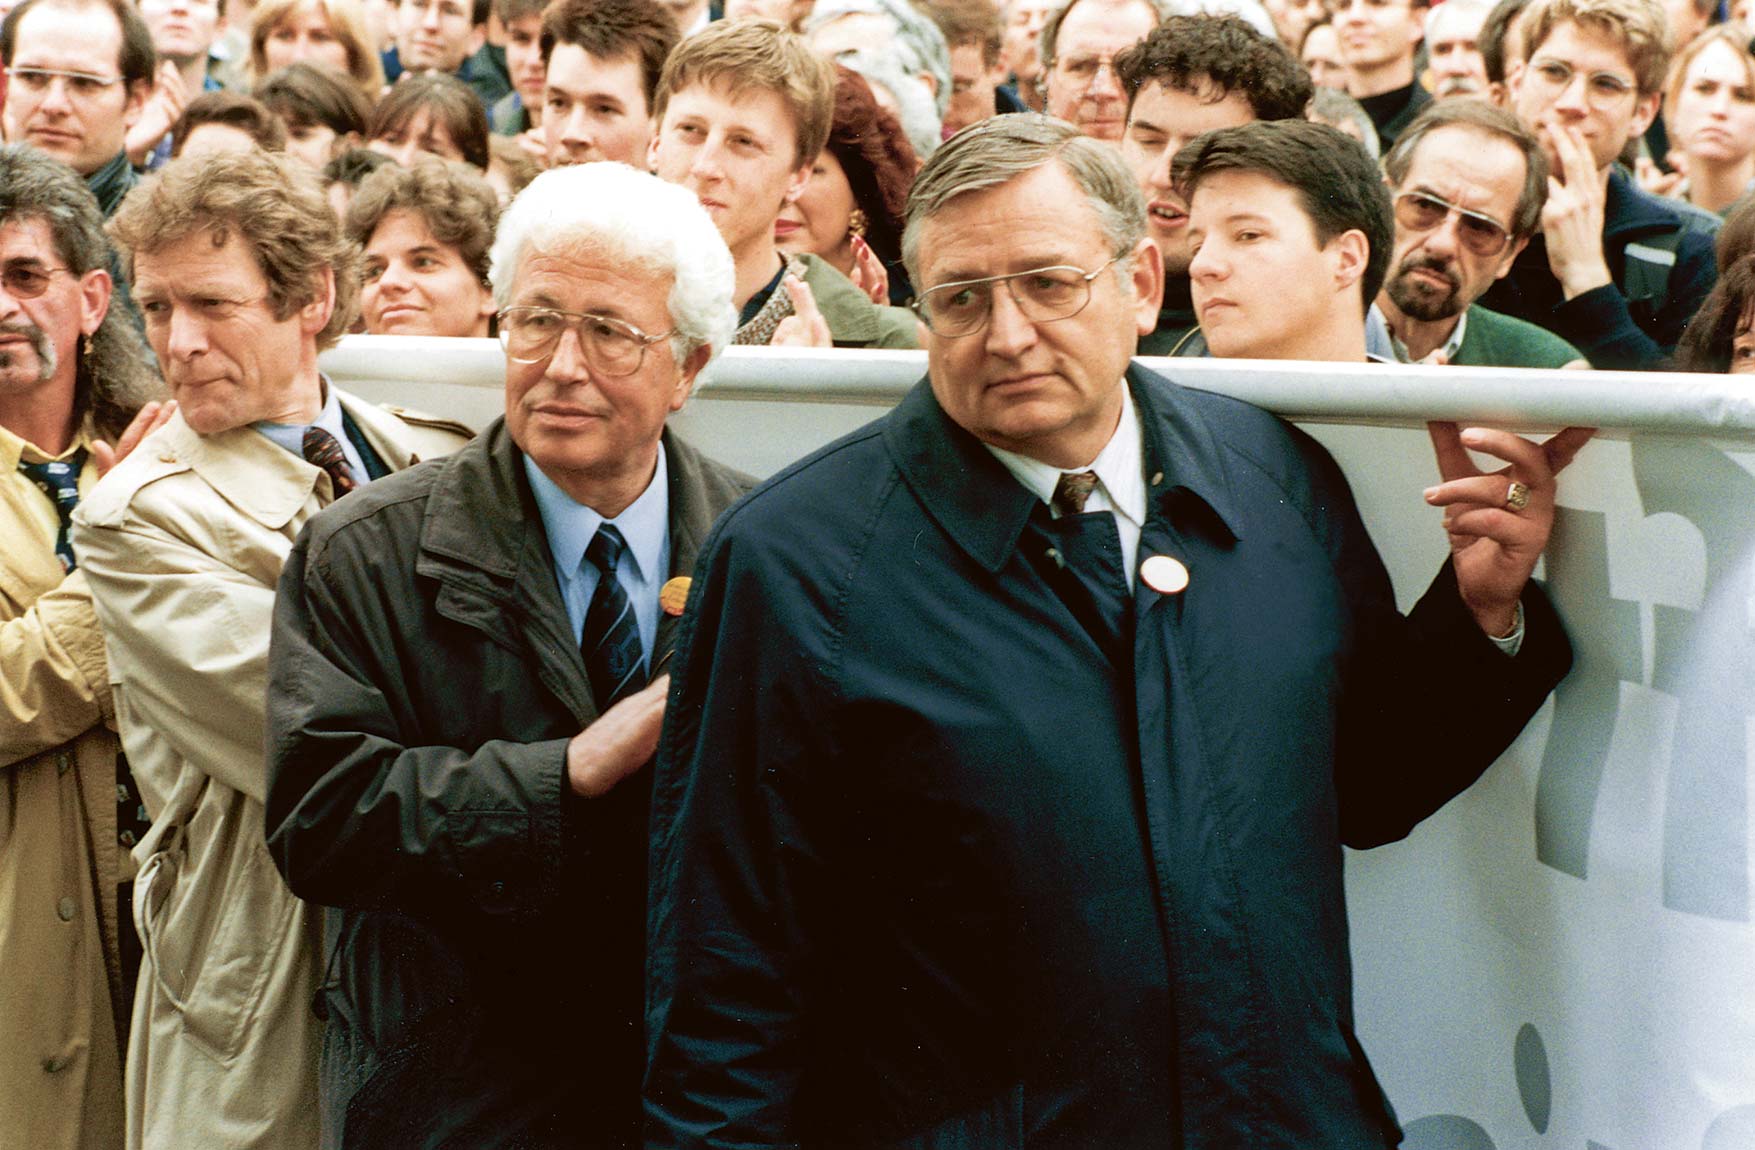 1998 – Clear Stand on Genetic Engineering (Pictured: Director of Education Ernst Buschor and UZH President Hans Heinrich Schmid demonstrate against restrictions on GM.)